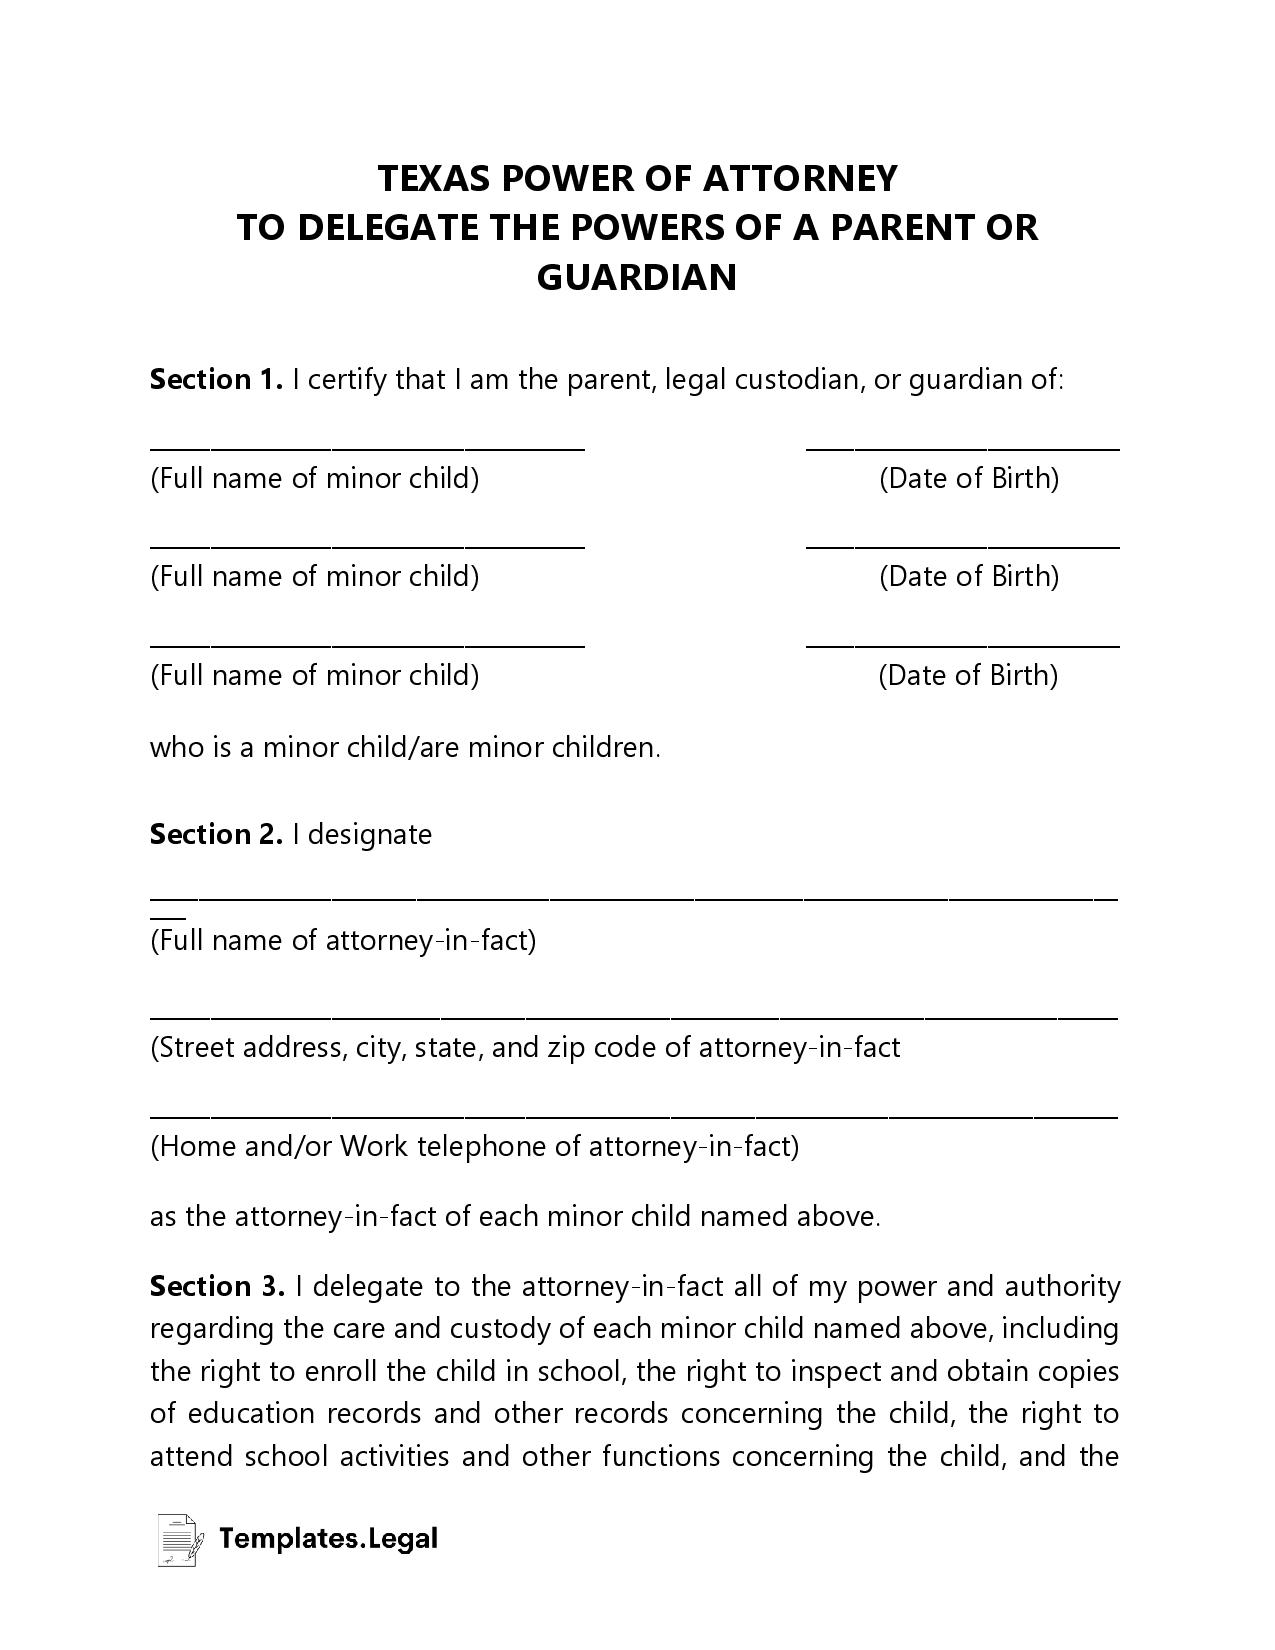 Texas Minor (Child) Power of Attorney - Templates.Legal